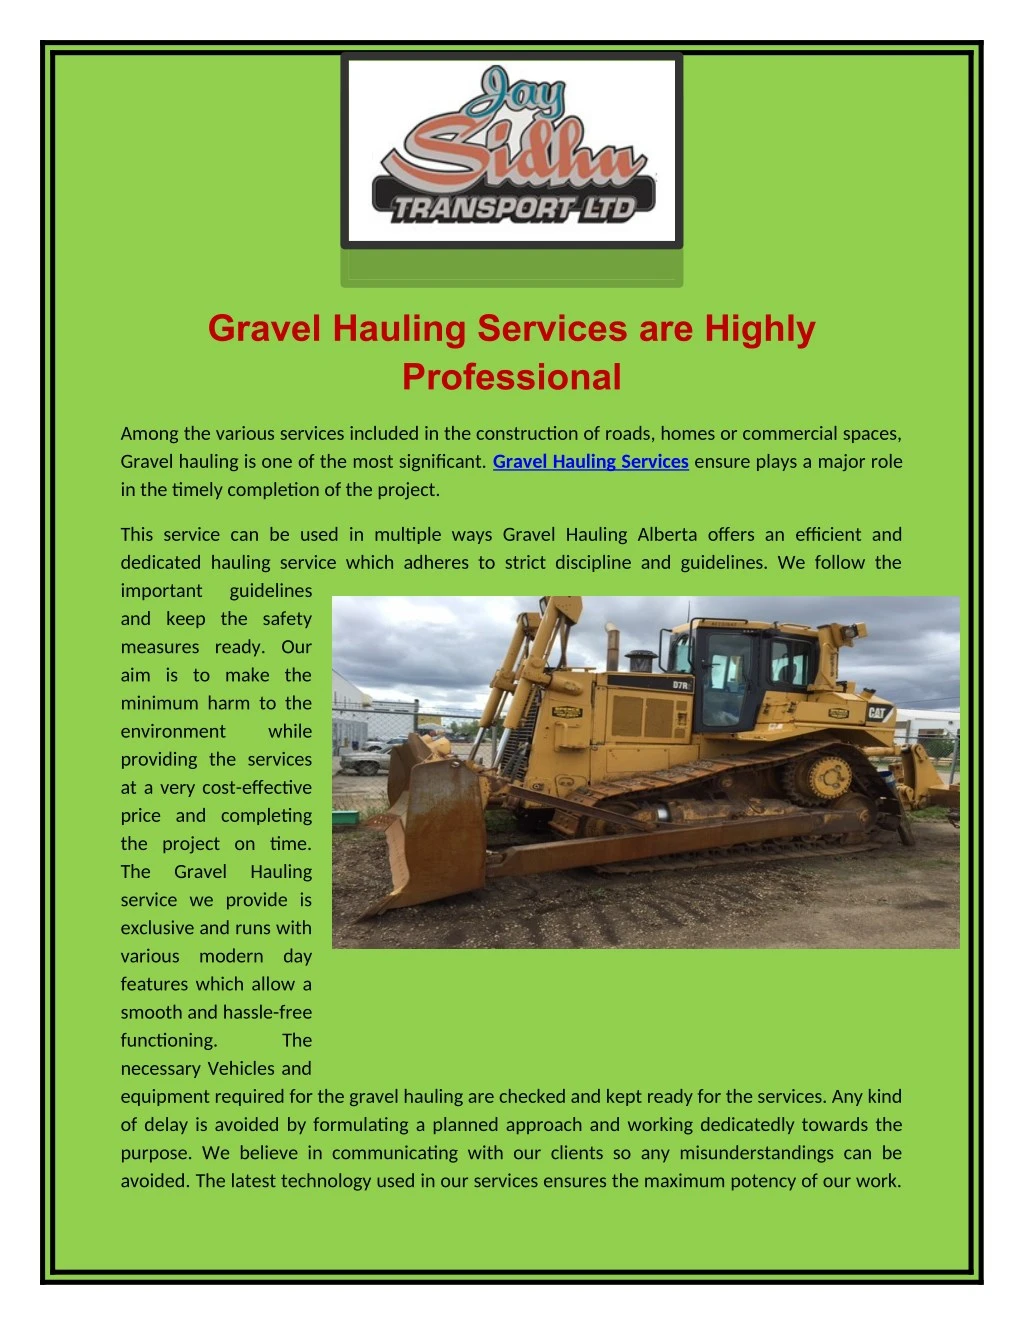 gravel hauling services are highly professional